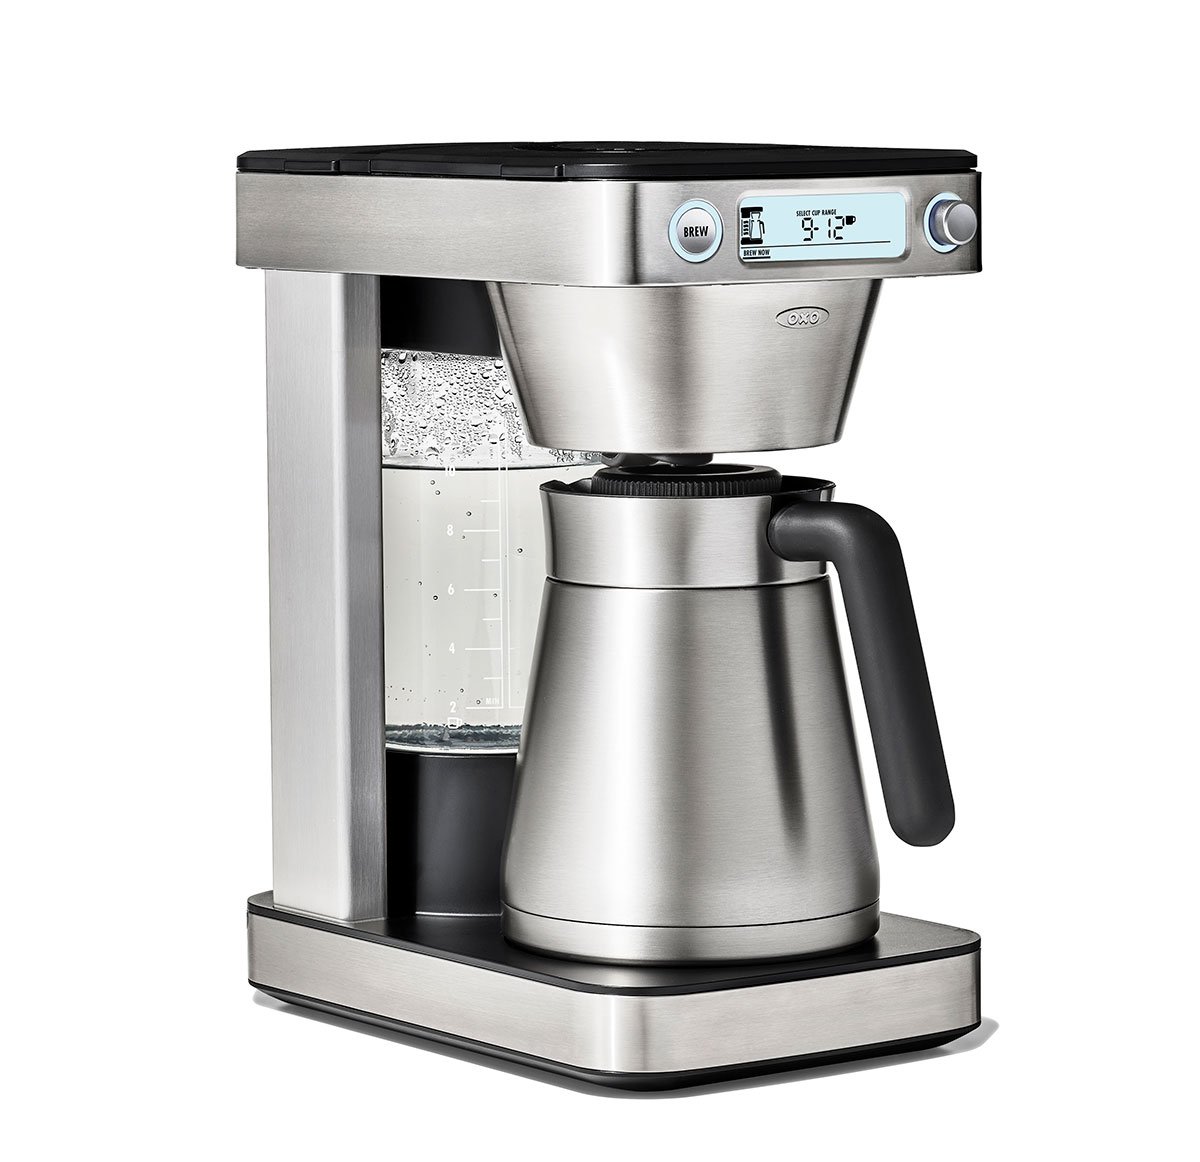 12-Cup Coffee Maker with Podless Single-Serve Function specifications tab image two